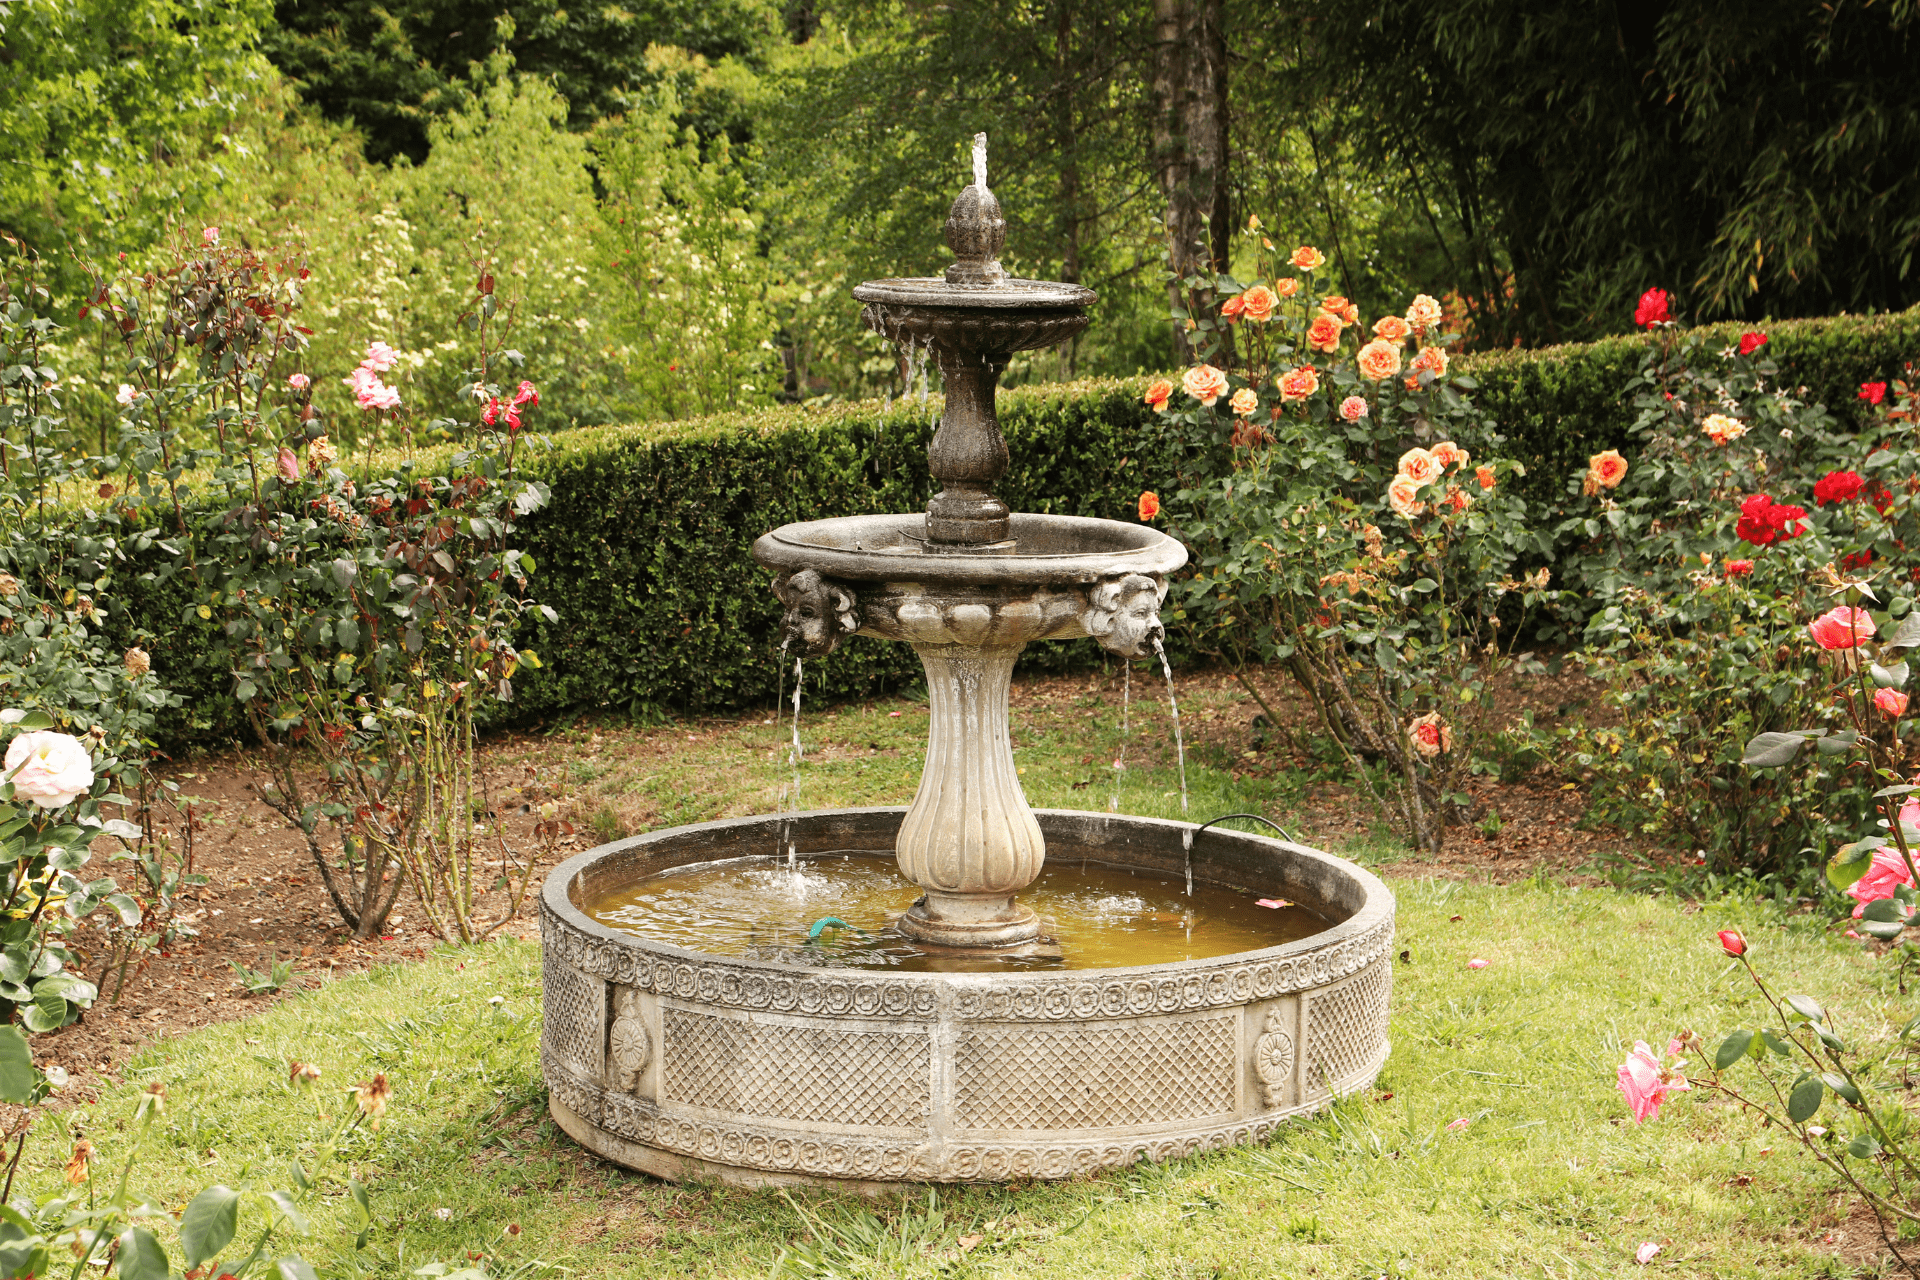 English Fountain Installed By Boise Landscaping Company In A Private Garden In Boise